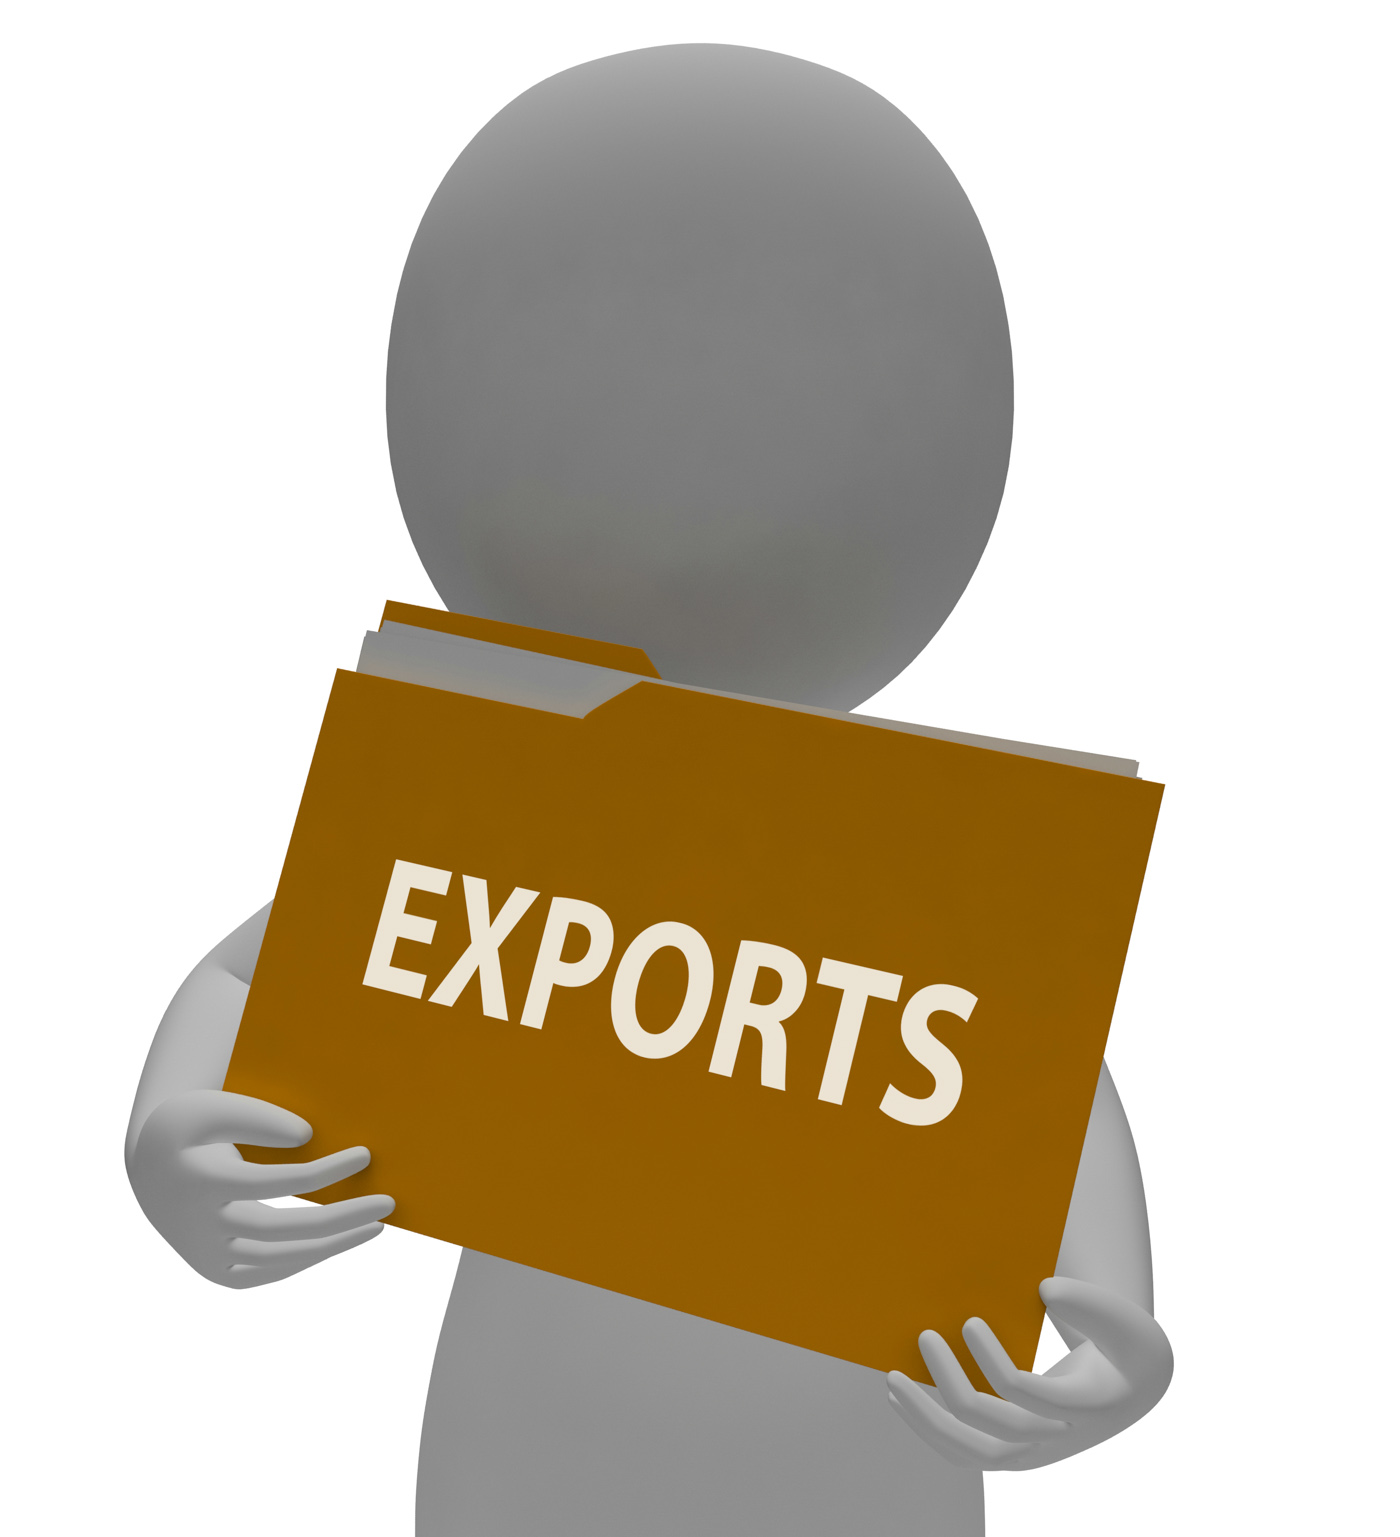 Exports folder shows international selling 3d rendering photo